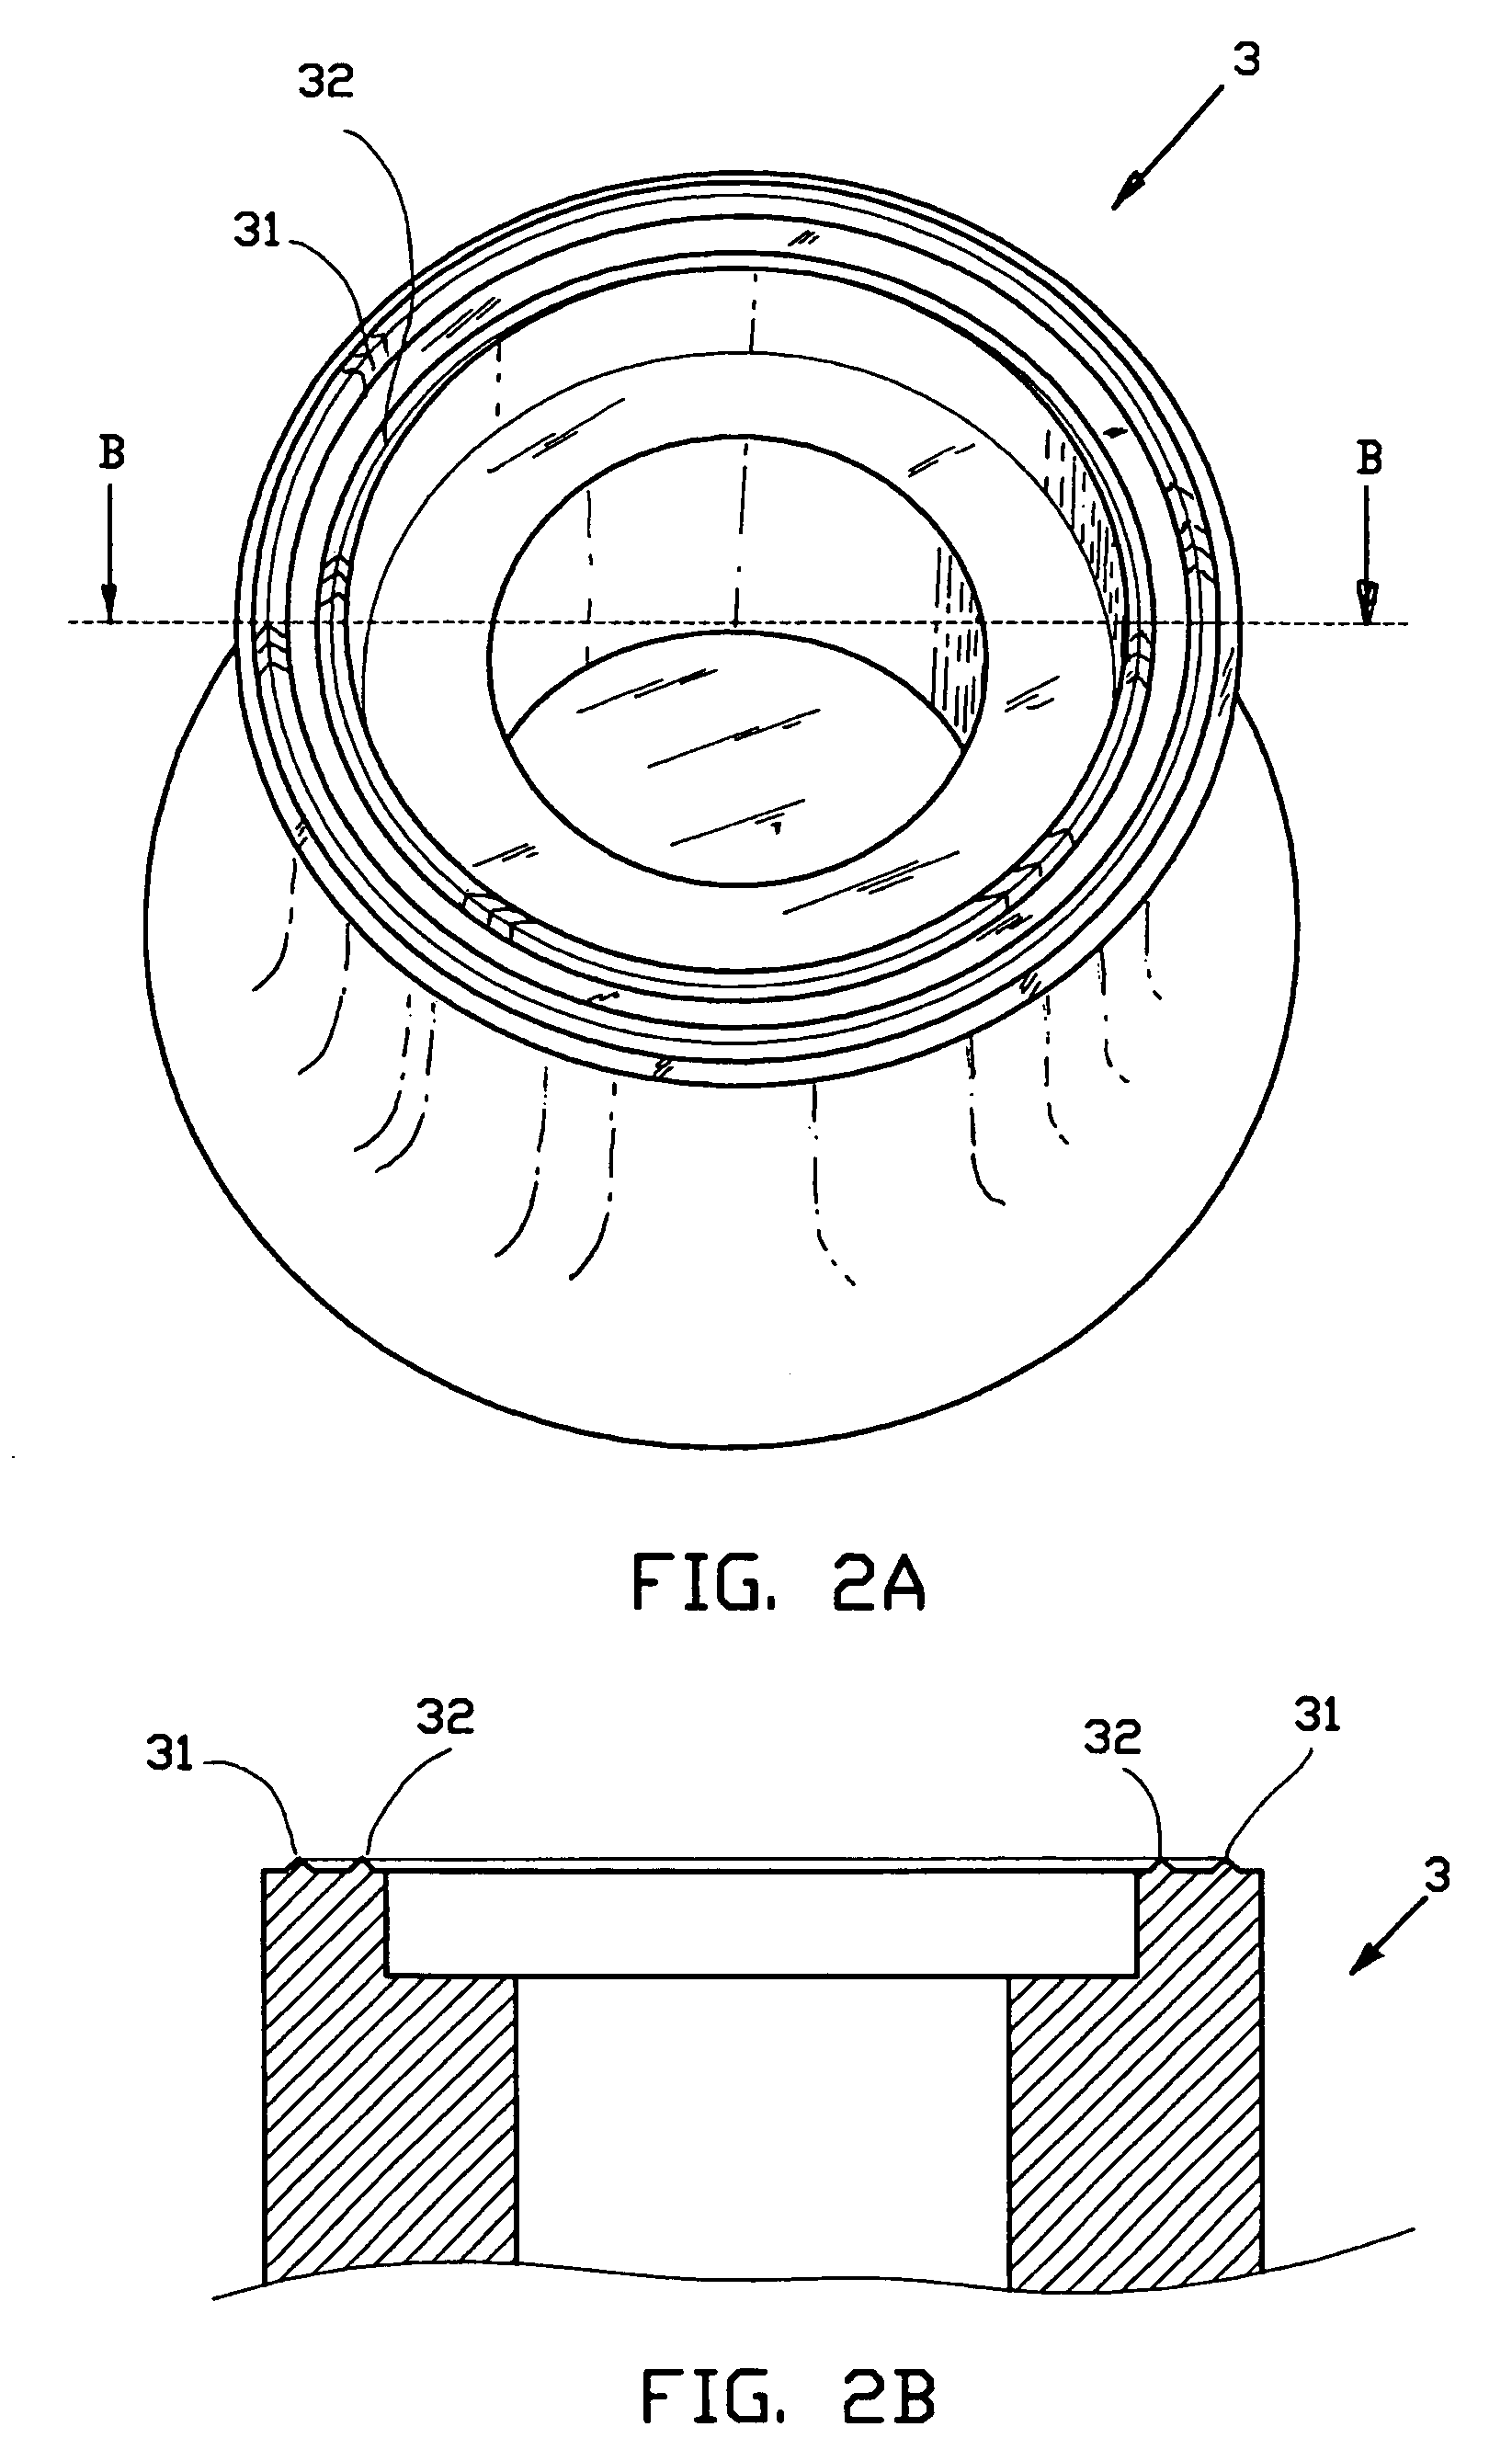 Method for bonding a body side wafer of a stoma system and a further component of said stoma system with each other